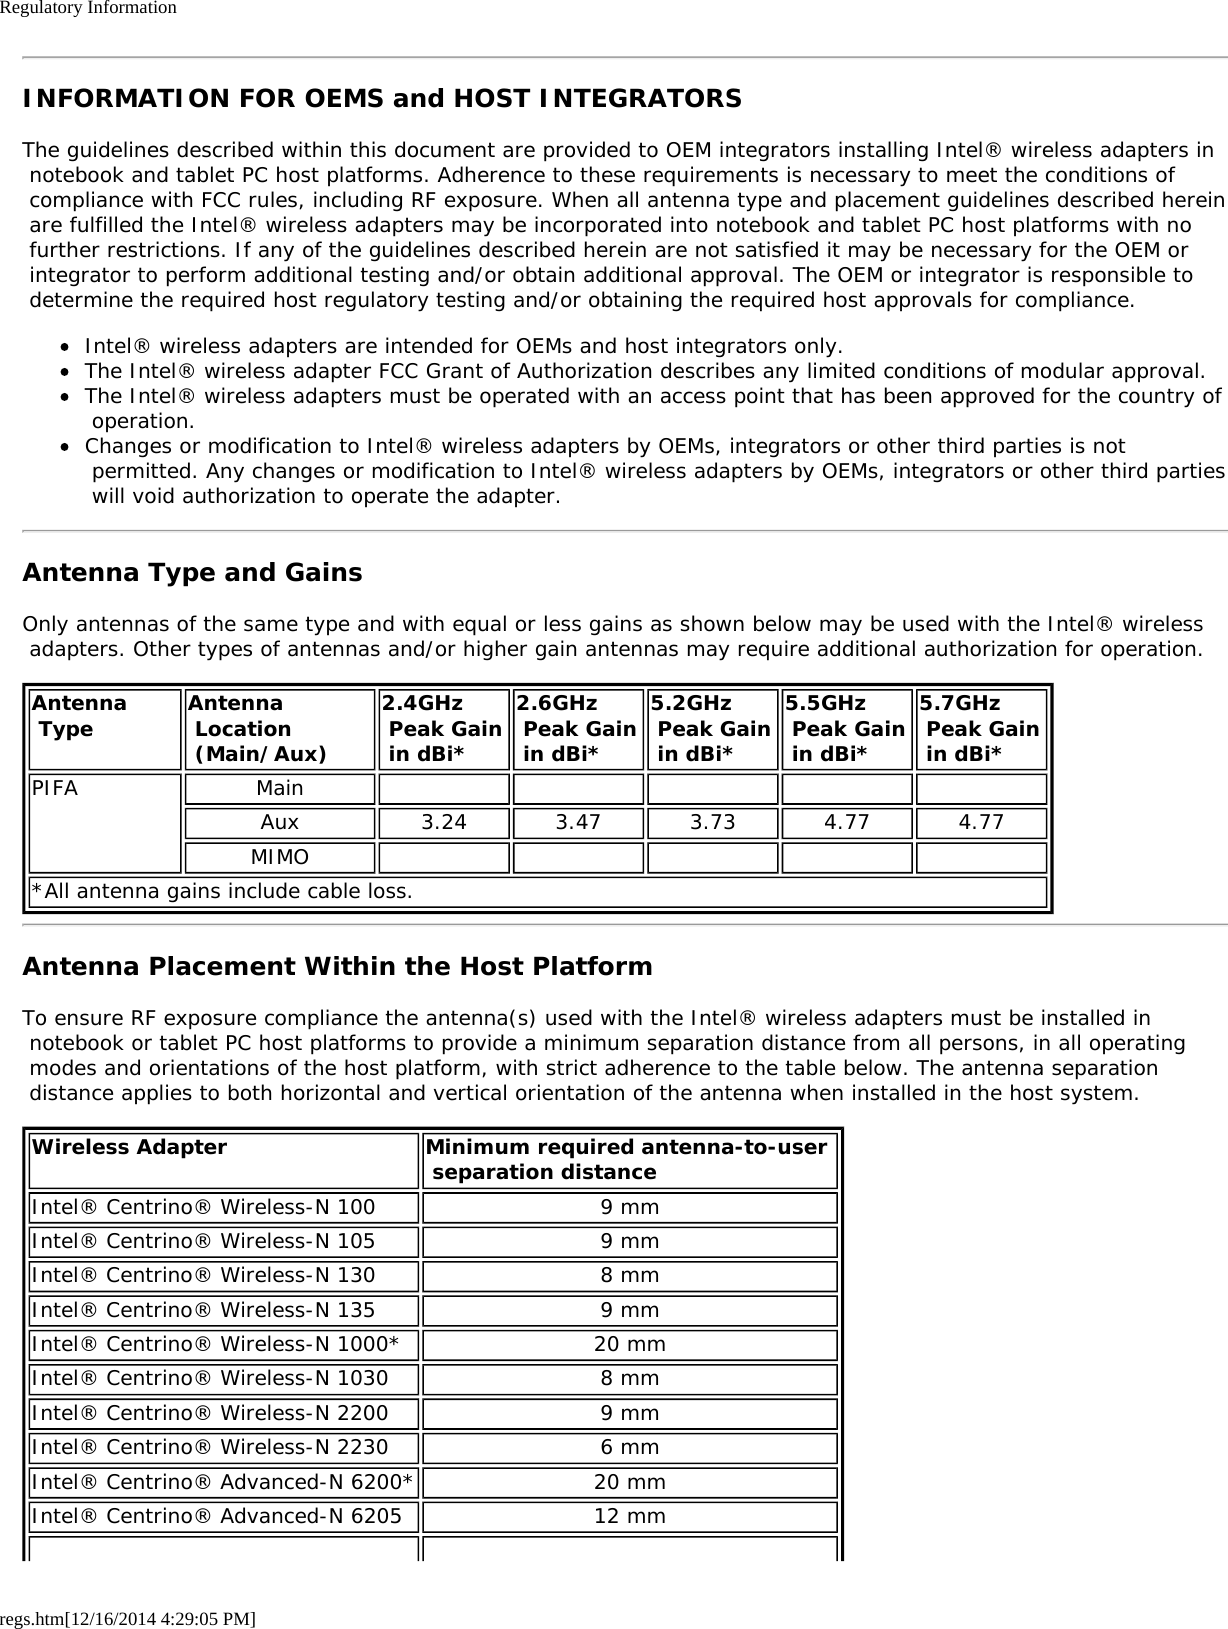 Regulatory Informationregs.htm[12/16/2014 4:29:05 PM]INFORMATION FOR OEMS and HOST INTEGRATORSThe guidelines described within this document are provided to OEM integrators installing Intel® wireless adapters in notebook and tablet PC host platforms. Adherence to these requirements is necessary to meet the conditions of compliance with FCC rules, including RF exposure. When all antenna type and placement guidelines described herein are fulfilled the Intel® wireless adapters may be incorporated into notebook and tablet PC host platforms with no further restrictions. If any of the guidelines described herein are not satisfied it may be necessary for the OEM or integrator to perform additional testing and/or obtain additional approval. The OEM or integrator is responsible to determine the required host regulatory testing and/or obtaining the required host approvals for compliance.Intel® wireless adapters are intended for OEMs and host integrators only.The Intel® wireless adapter FCC Grant of Authorization describes any limited conditions of modular approval.The Intel® wireless adapters must be operated with an access point that has been approved for the country of operation.Changes or modification to Intel® wireless adapters by OEMs, integrators or other third parties is not permitted. Any changes or modification to Intel® wireless adapters by OEMs, integrators or other third parties will void authorization to operate the adapter.Antenna Type and GainsOnly antennas of the same type and with equal or less gains as shown below may be used with the Intel® wireless adapters. Other types of antennas and/or higher gain antennas may require additional authorization for operation.Antenna Type Antenna Location (Main/Aux)2.4GHz Peak Gain in dBi*2.6GHz Peak Gain in dBi*5.2GHz Peak Gain in dBi*5.5GHz Peak Gain in dBi*5.7GHz  Peak Gain in dBi*PIFA MainAux 3.24 3.47 3.73 4.77 4.77MIMO*All antenna gains include cable loss.Antenna Placement Within the Host PlatformTo ensure RF exposure compliance the antenna(s) used with the Intel® wireless adapters must be installed in notebook or tablet PC host platforms to provide a minimum separation distance from all persons, in all operating modes and orientations of the host platform, with strict adherence to the table below. The antenna separation distance applies to both horizontal and vertical orientation of the antenna when installed in the host system.Wireless Adapter Minimum required antenna-to-user  separation distanceIntel® Centrino® Wireless-N 100 9 mmIntel® Centrino® Wireless-N 105 9 mmIntel® Centrino® Wireless-N 130 8 mmIntel® Centrino® Wireless-N 135 9 mmIntel® Centrino® Wireless-N 1000* 20 mmIntel® Centrino® Wireless-N 1030 8 mmIntel® Centrino® Wireless-N 2200 9 mmIntel® Centrino® Wireless-N 2230 6 mmIntel® Centrino® Advanced-N 6200* 20 mmIntel® Centrino® Advanced-N 6205 12 mm